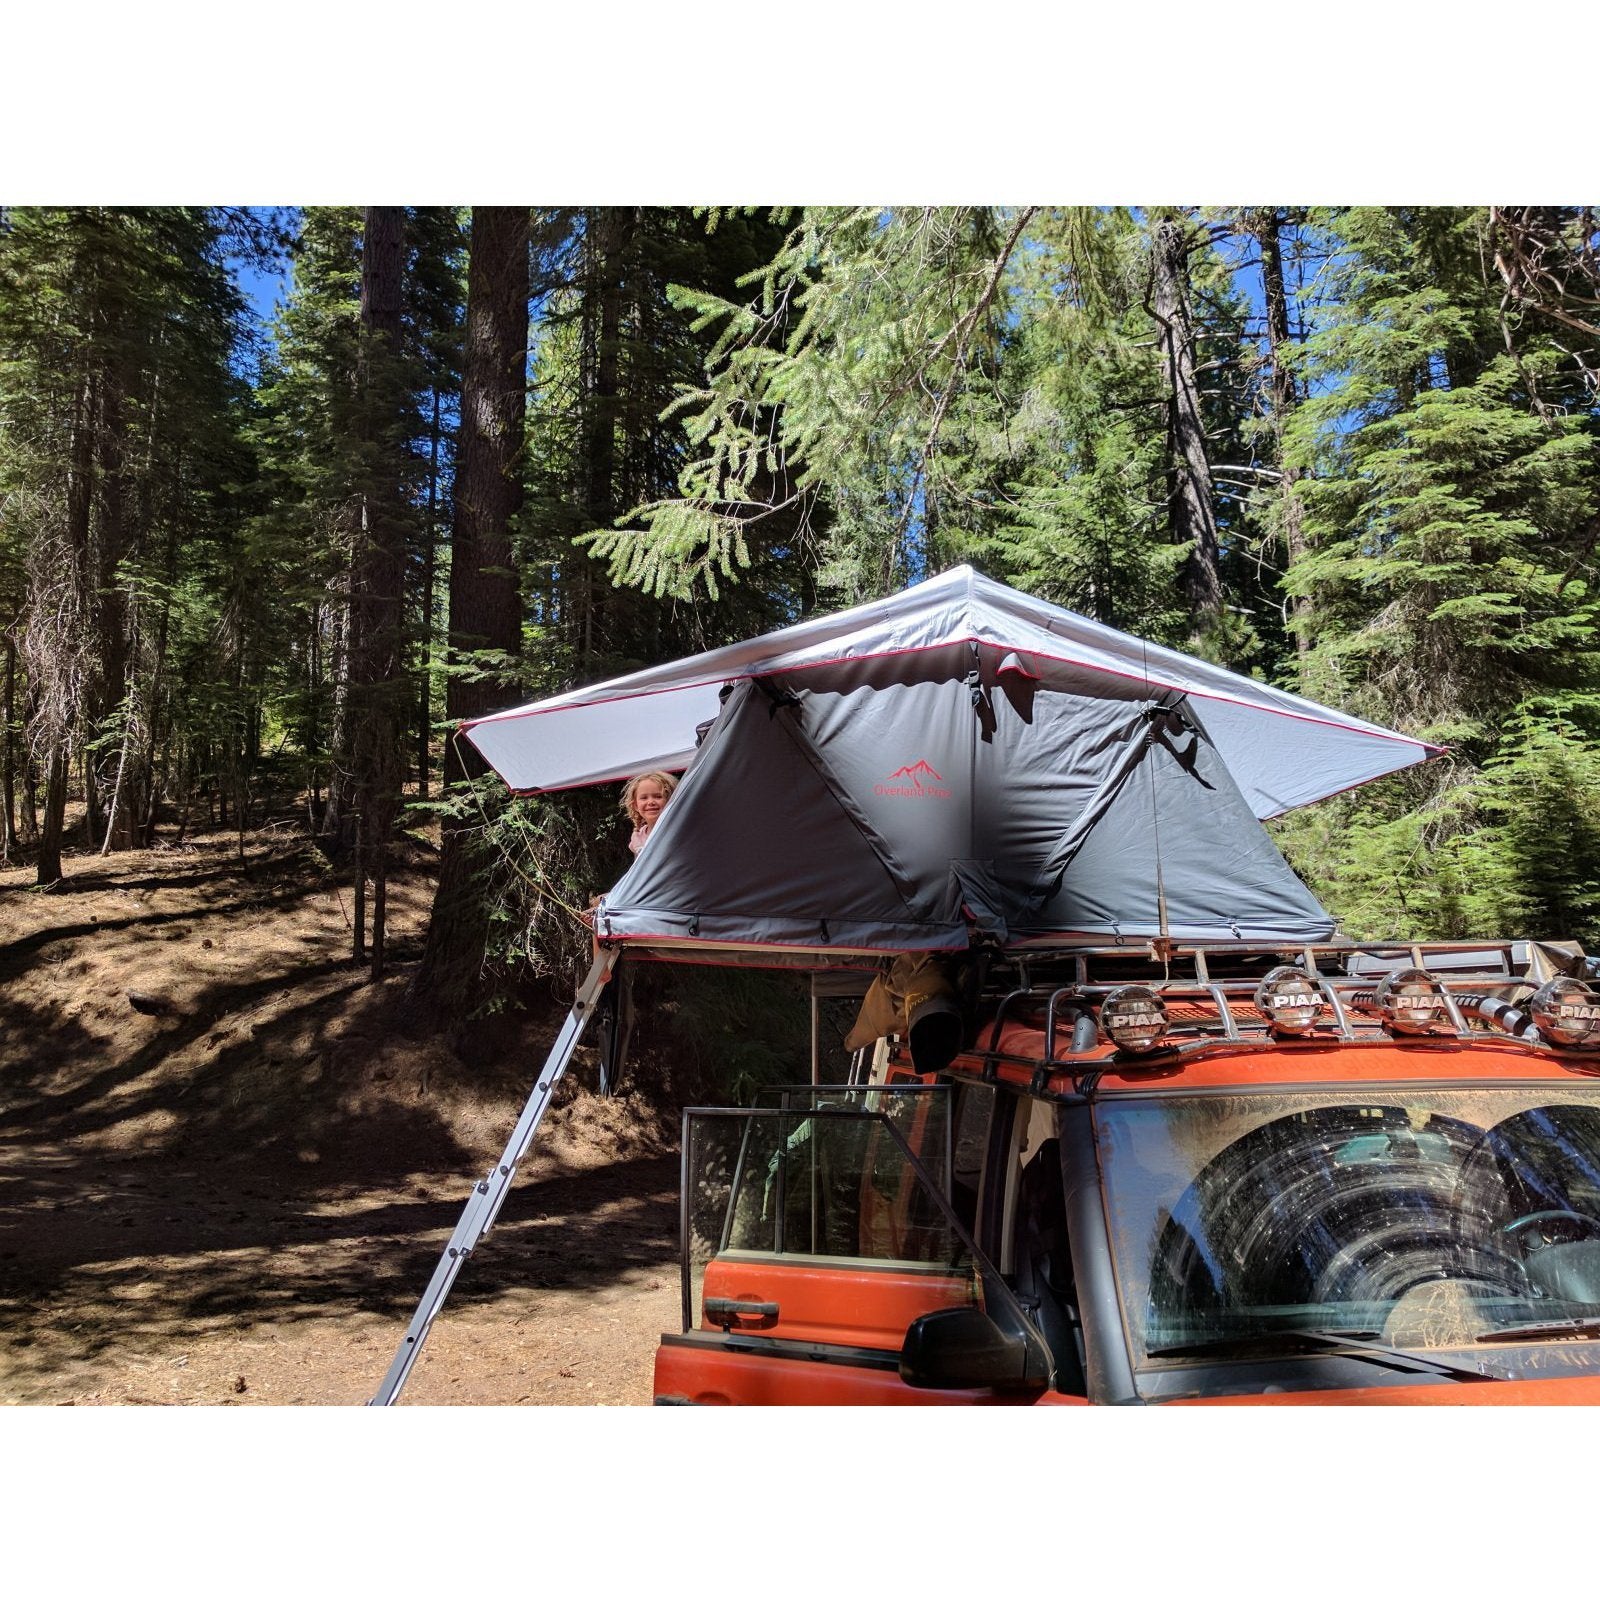 Overland Pros Anza 2000 (4-5 Person) - Soft Shell Roof Top Tents - Anytime Overland